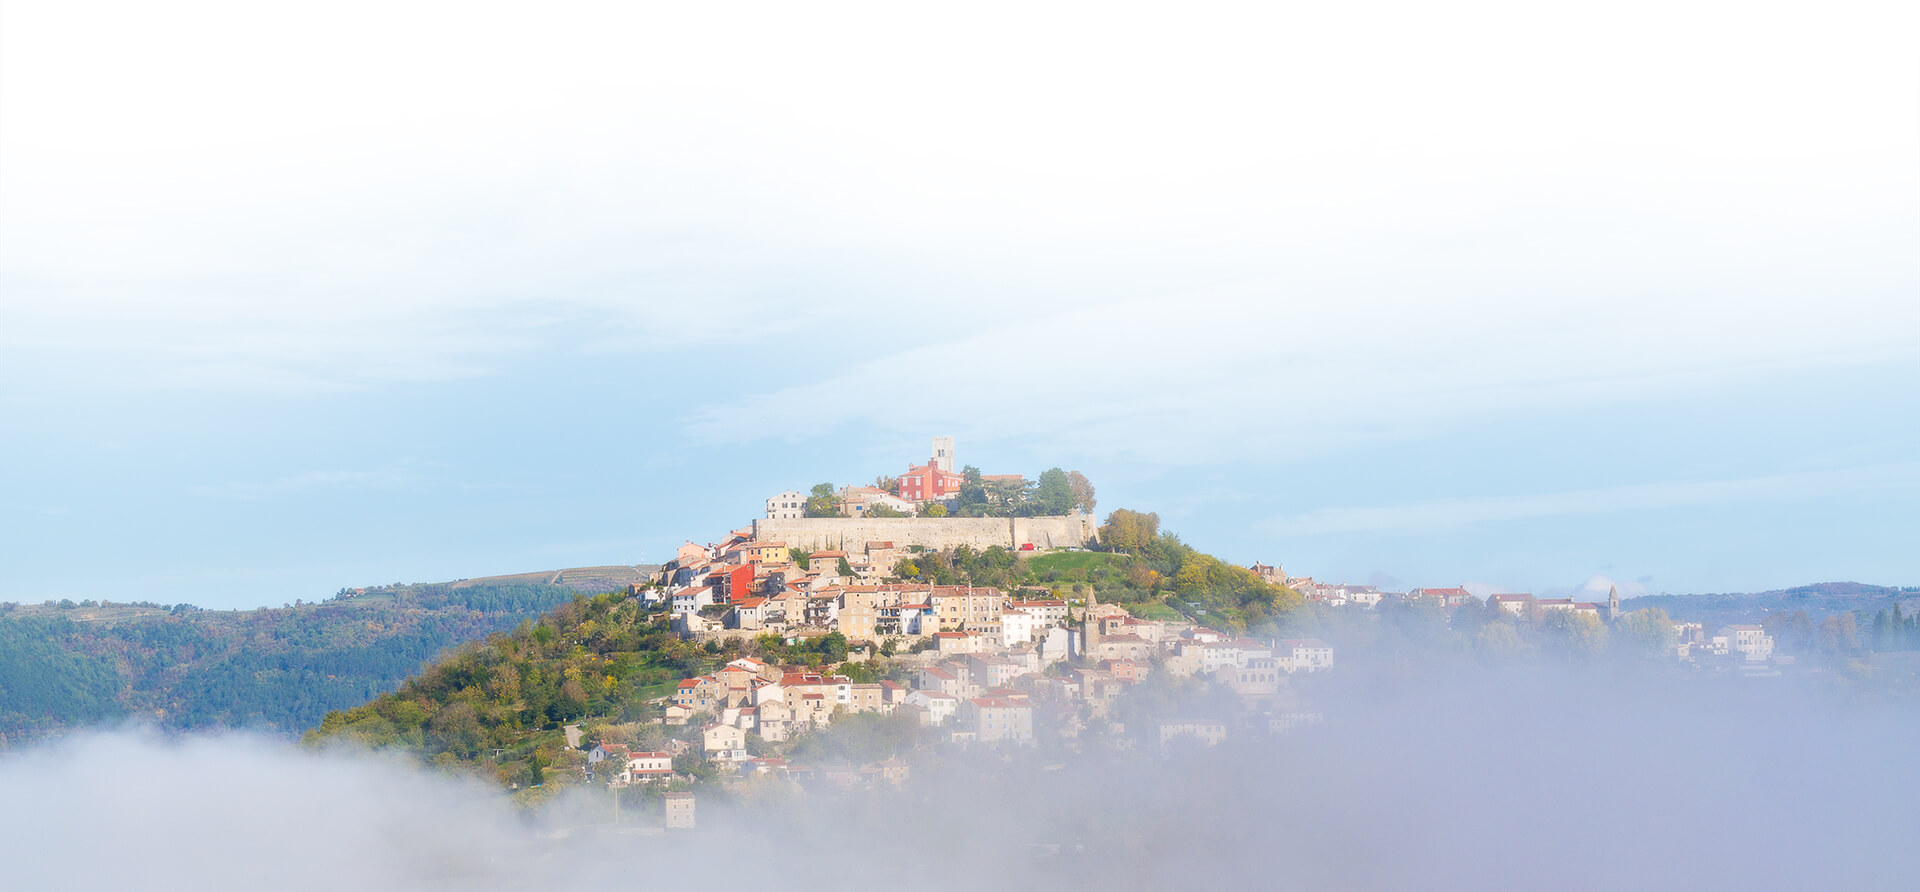 Image of a city on a hill